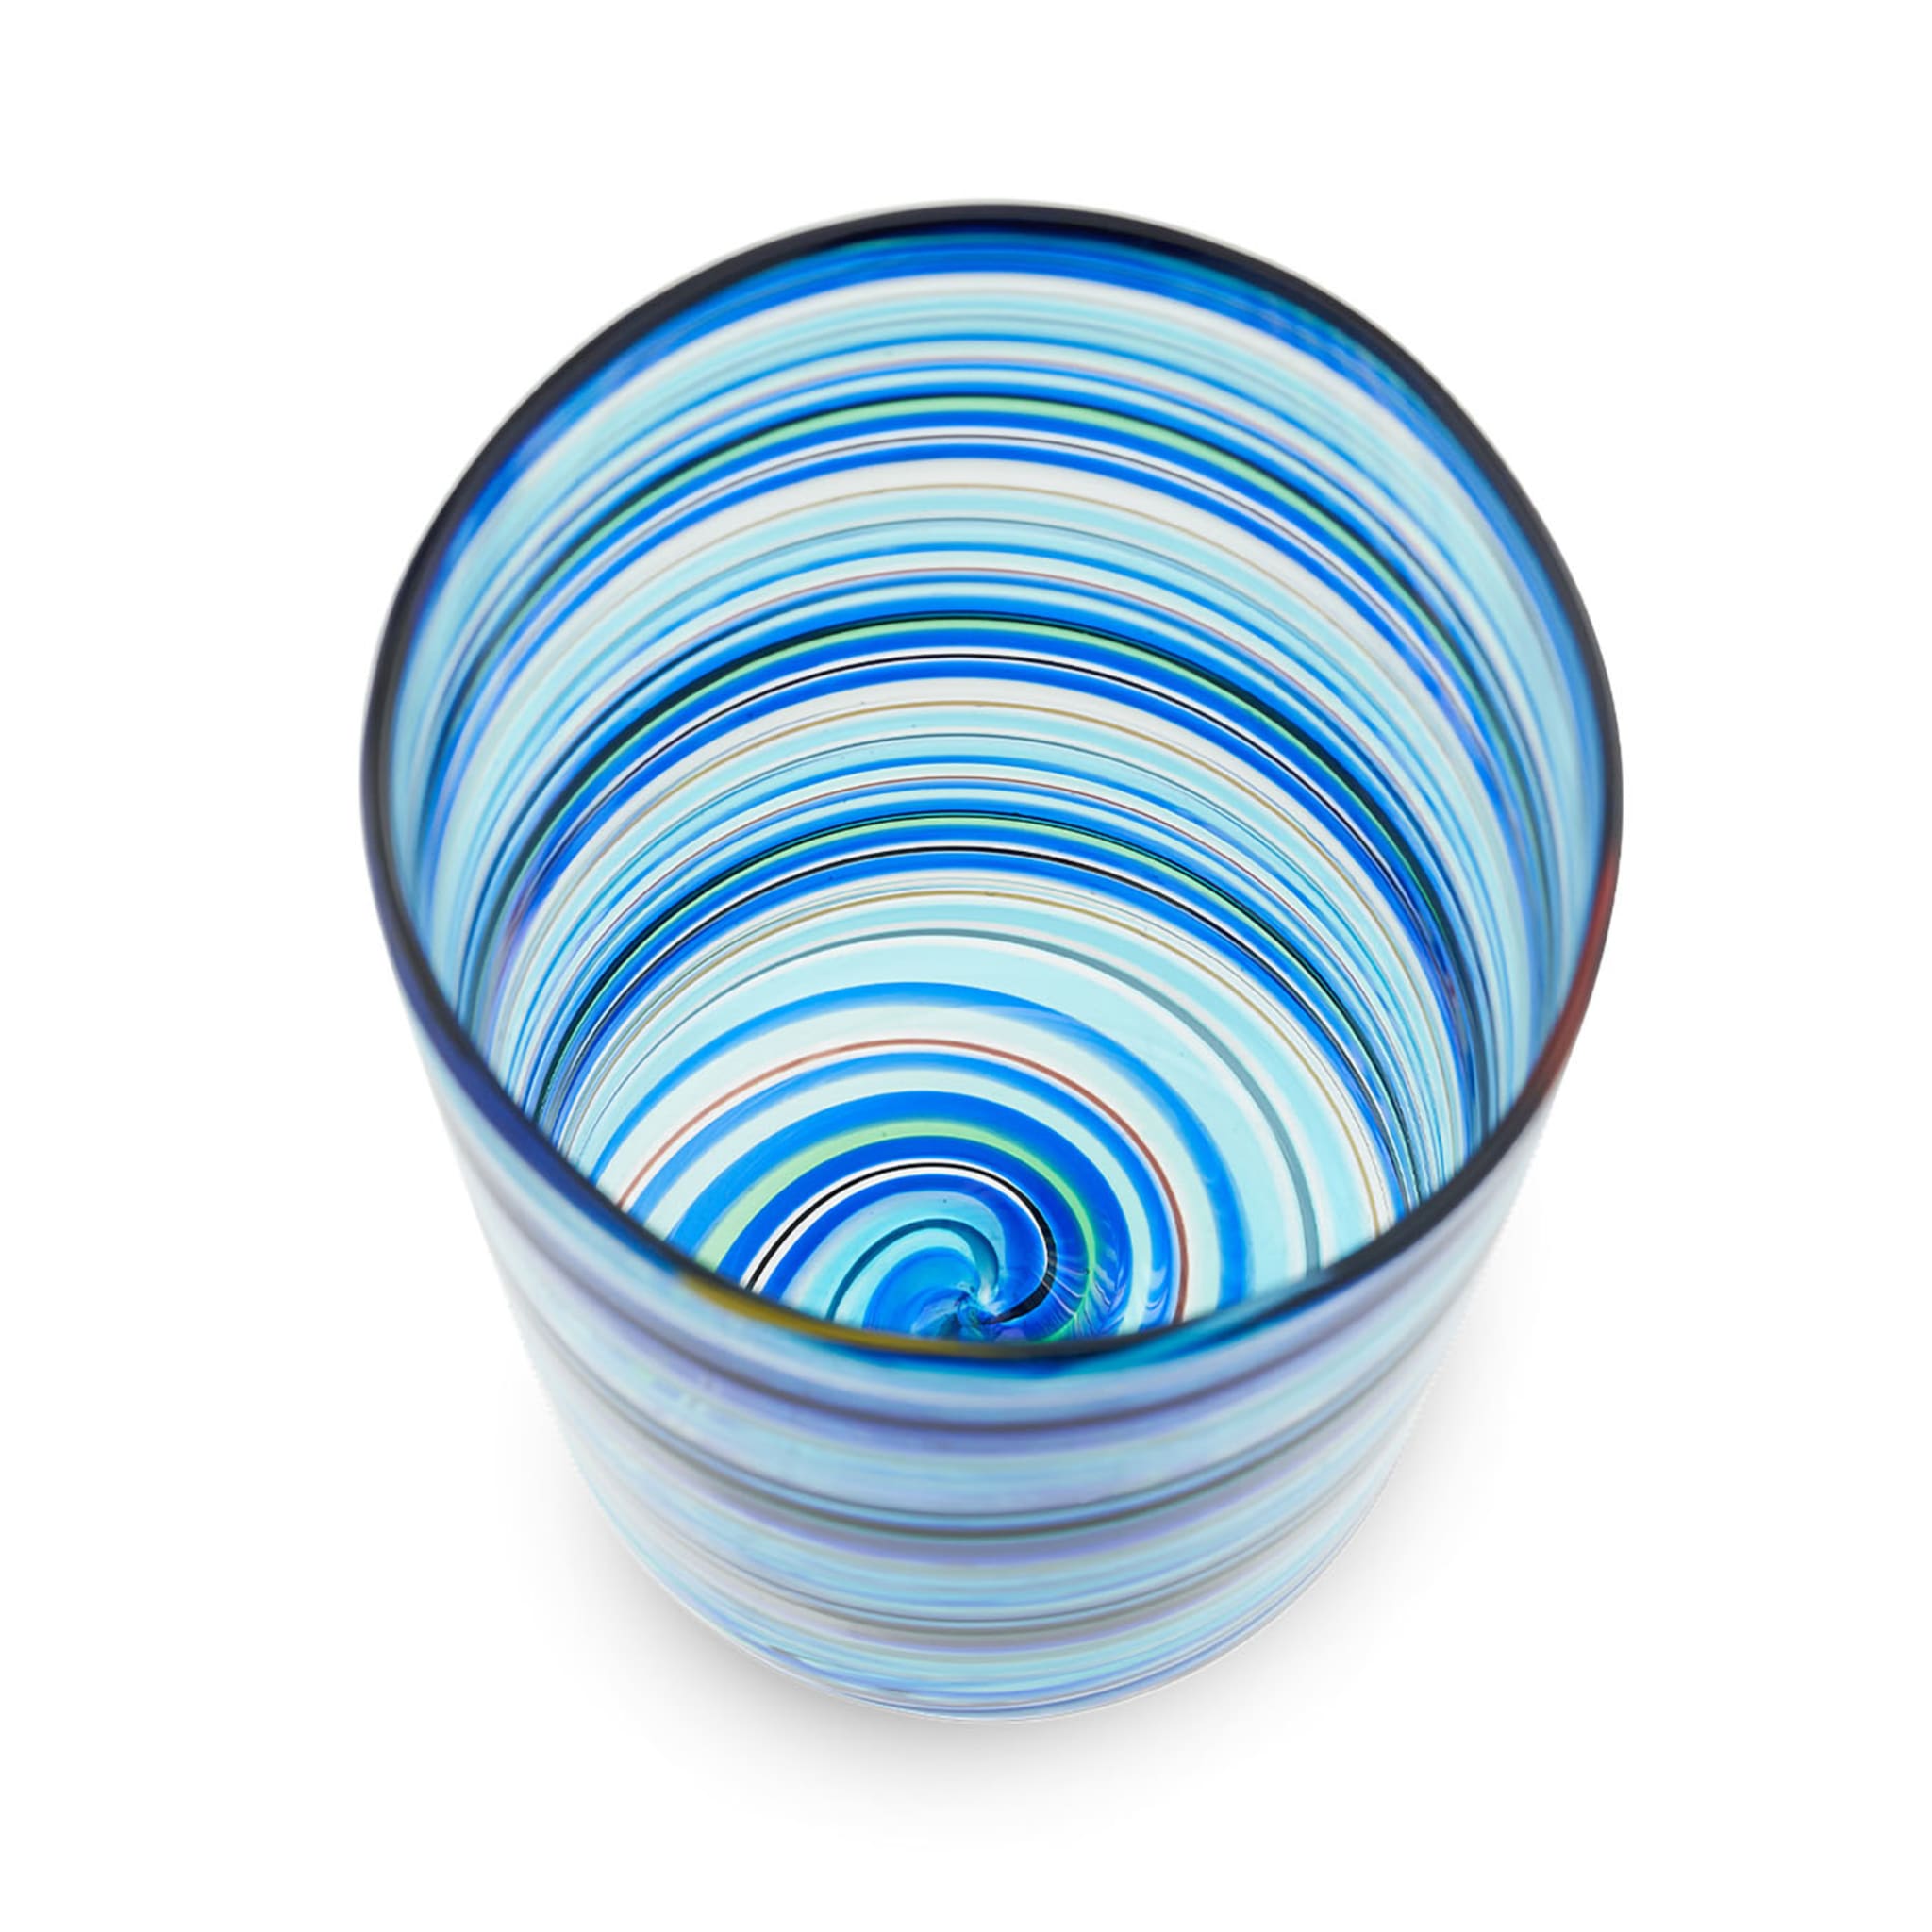 Rainbow Swirl Set of 2 Mouth-Blown Blue Water Tumblers  - Alternative view 1